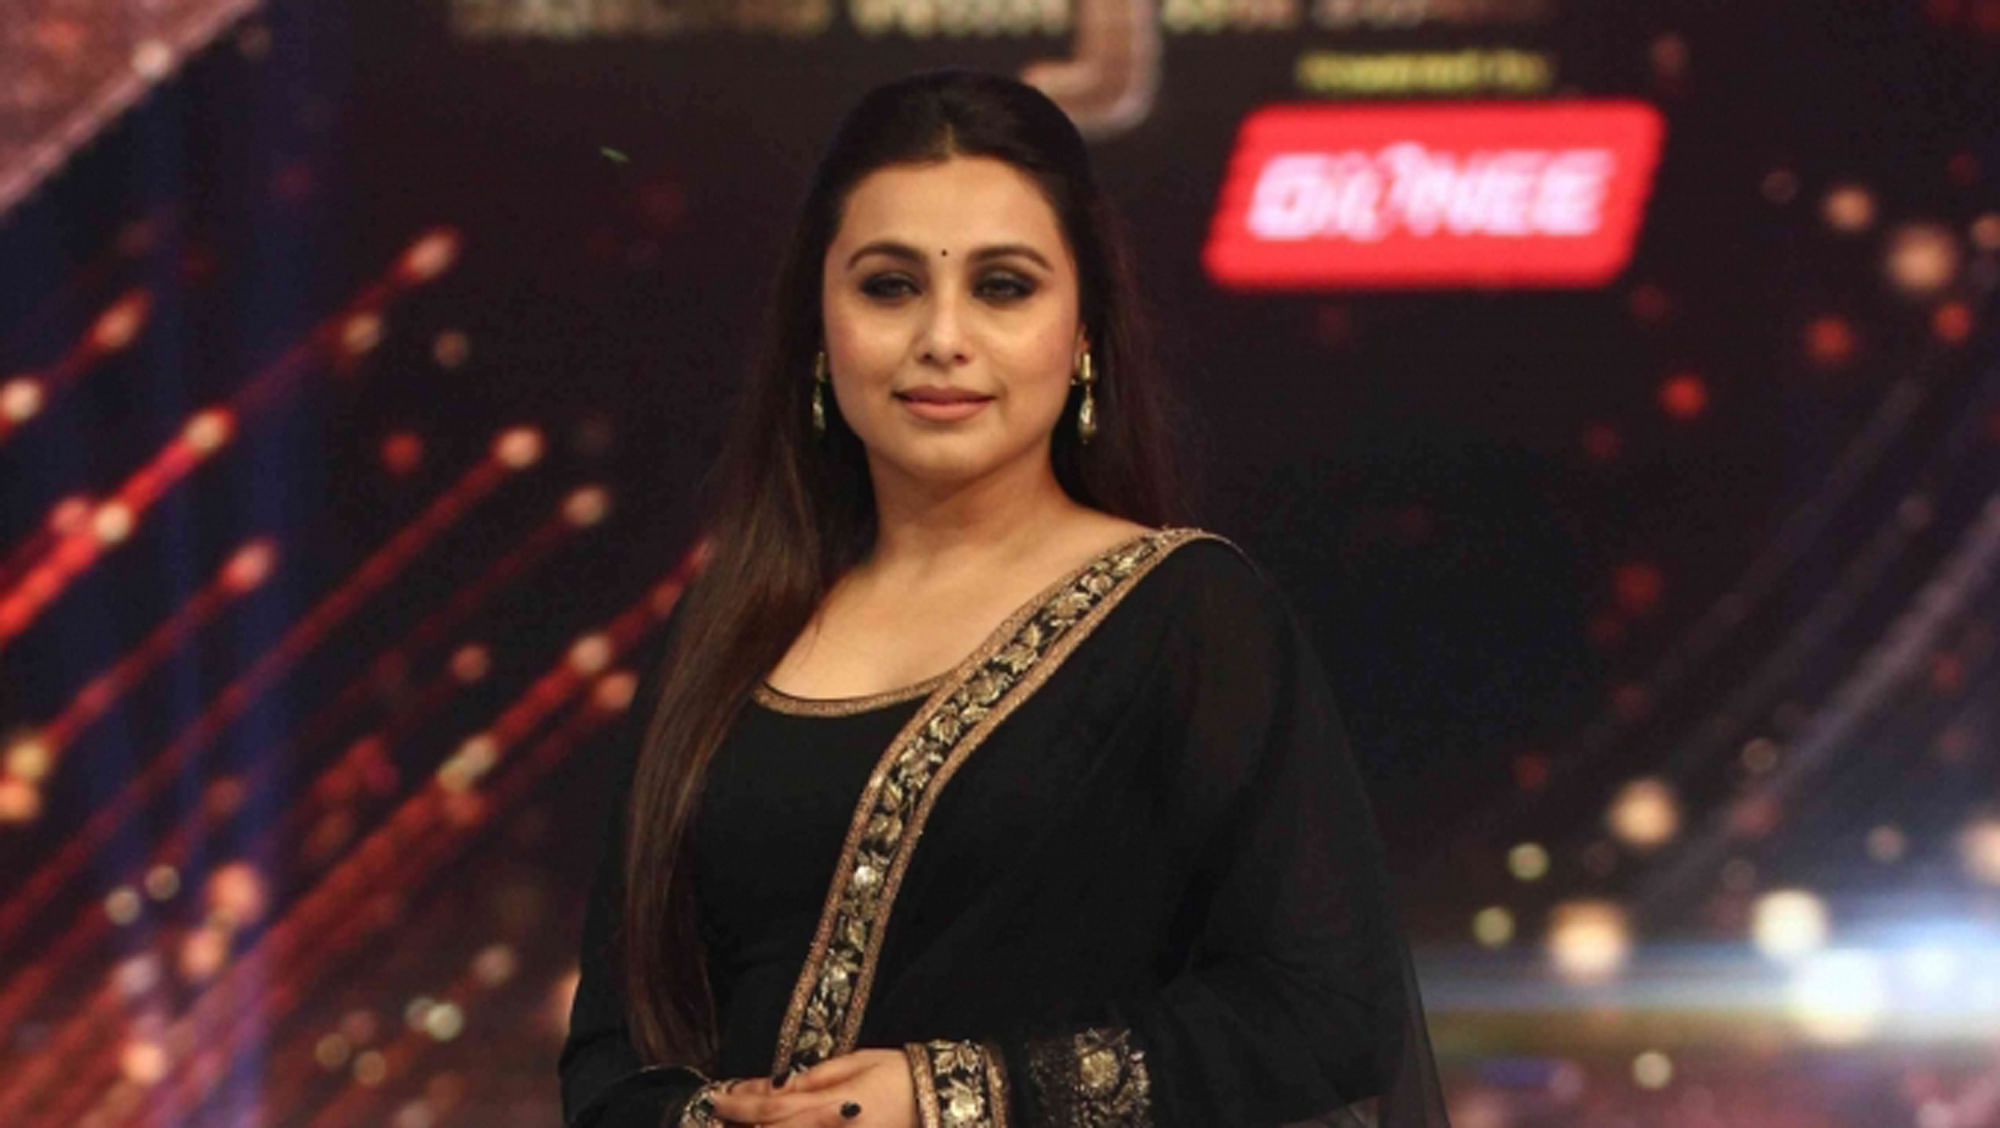 

Rani during her pregnancy